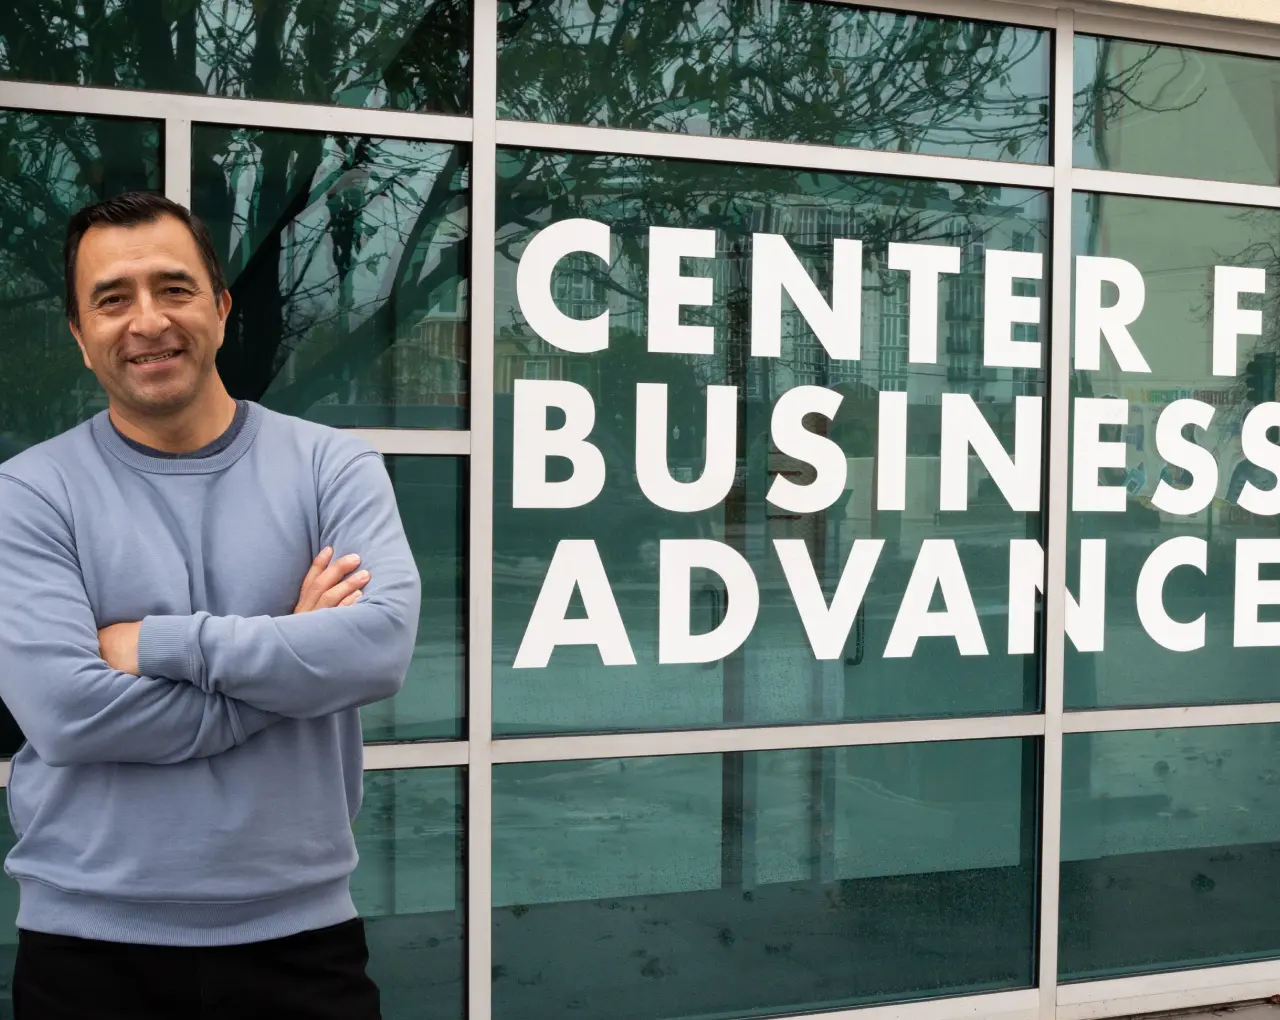 A smiling Joel Sedeño poses in front of the SBDC office, representing small business support.